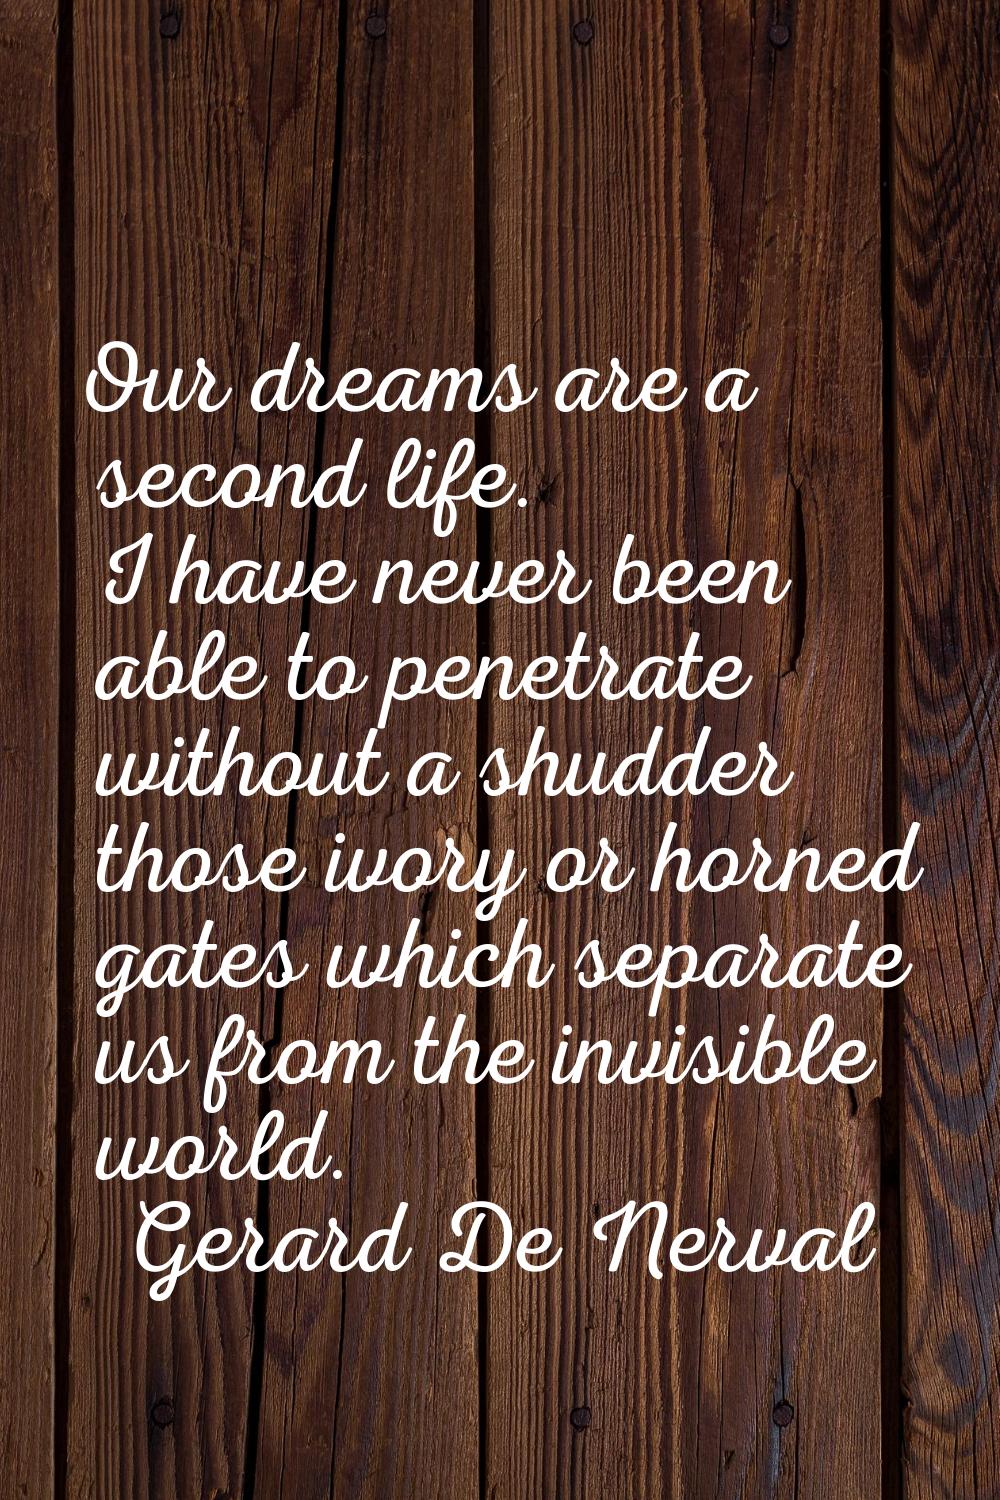 Our dreams are a second life. I have never been able to penetrate without a shudder those ivory or 